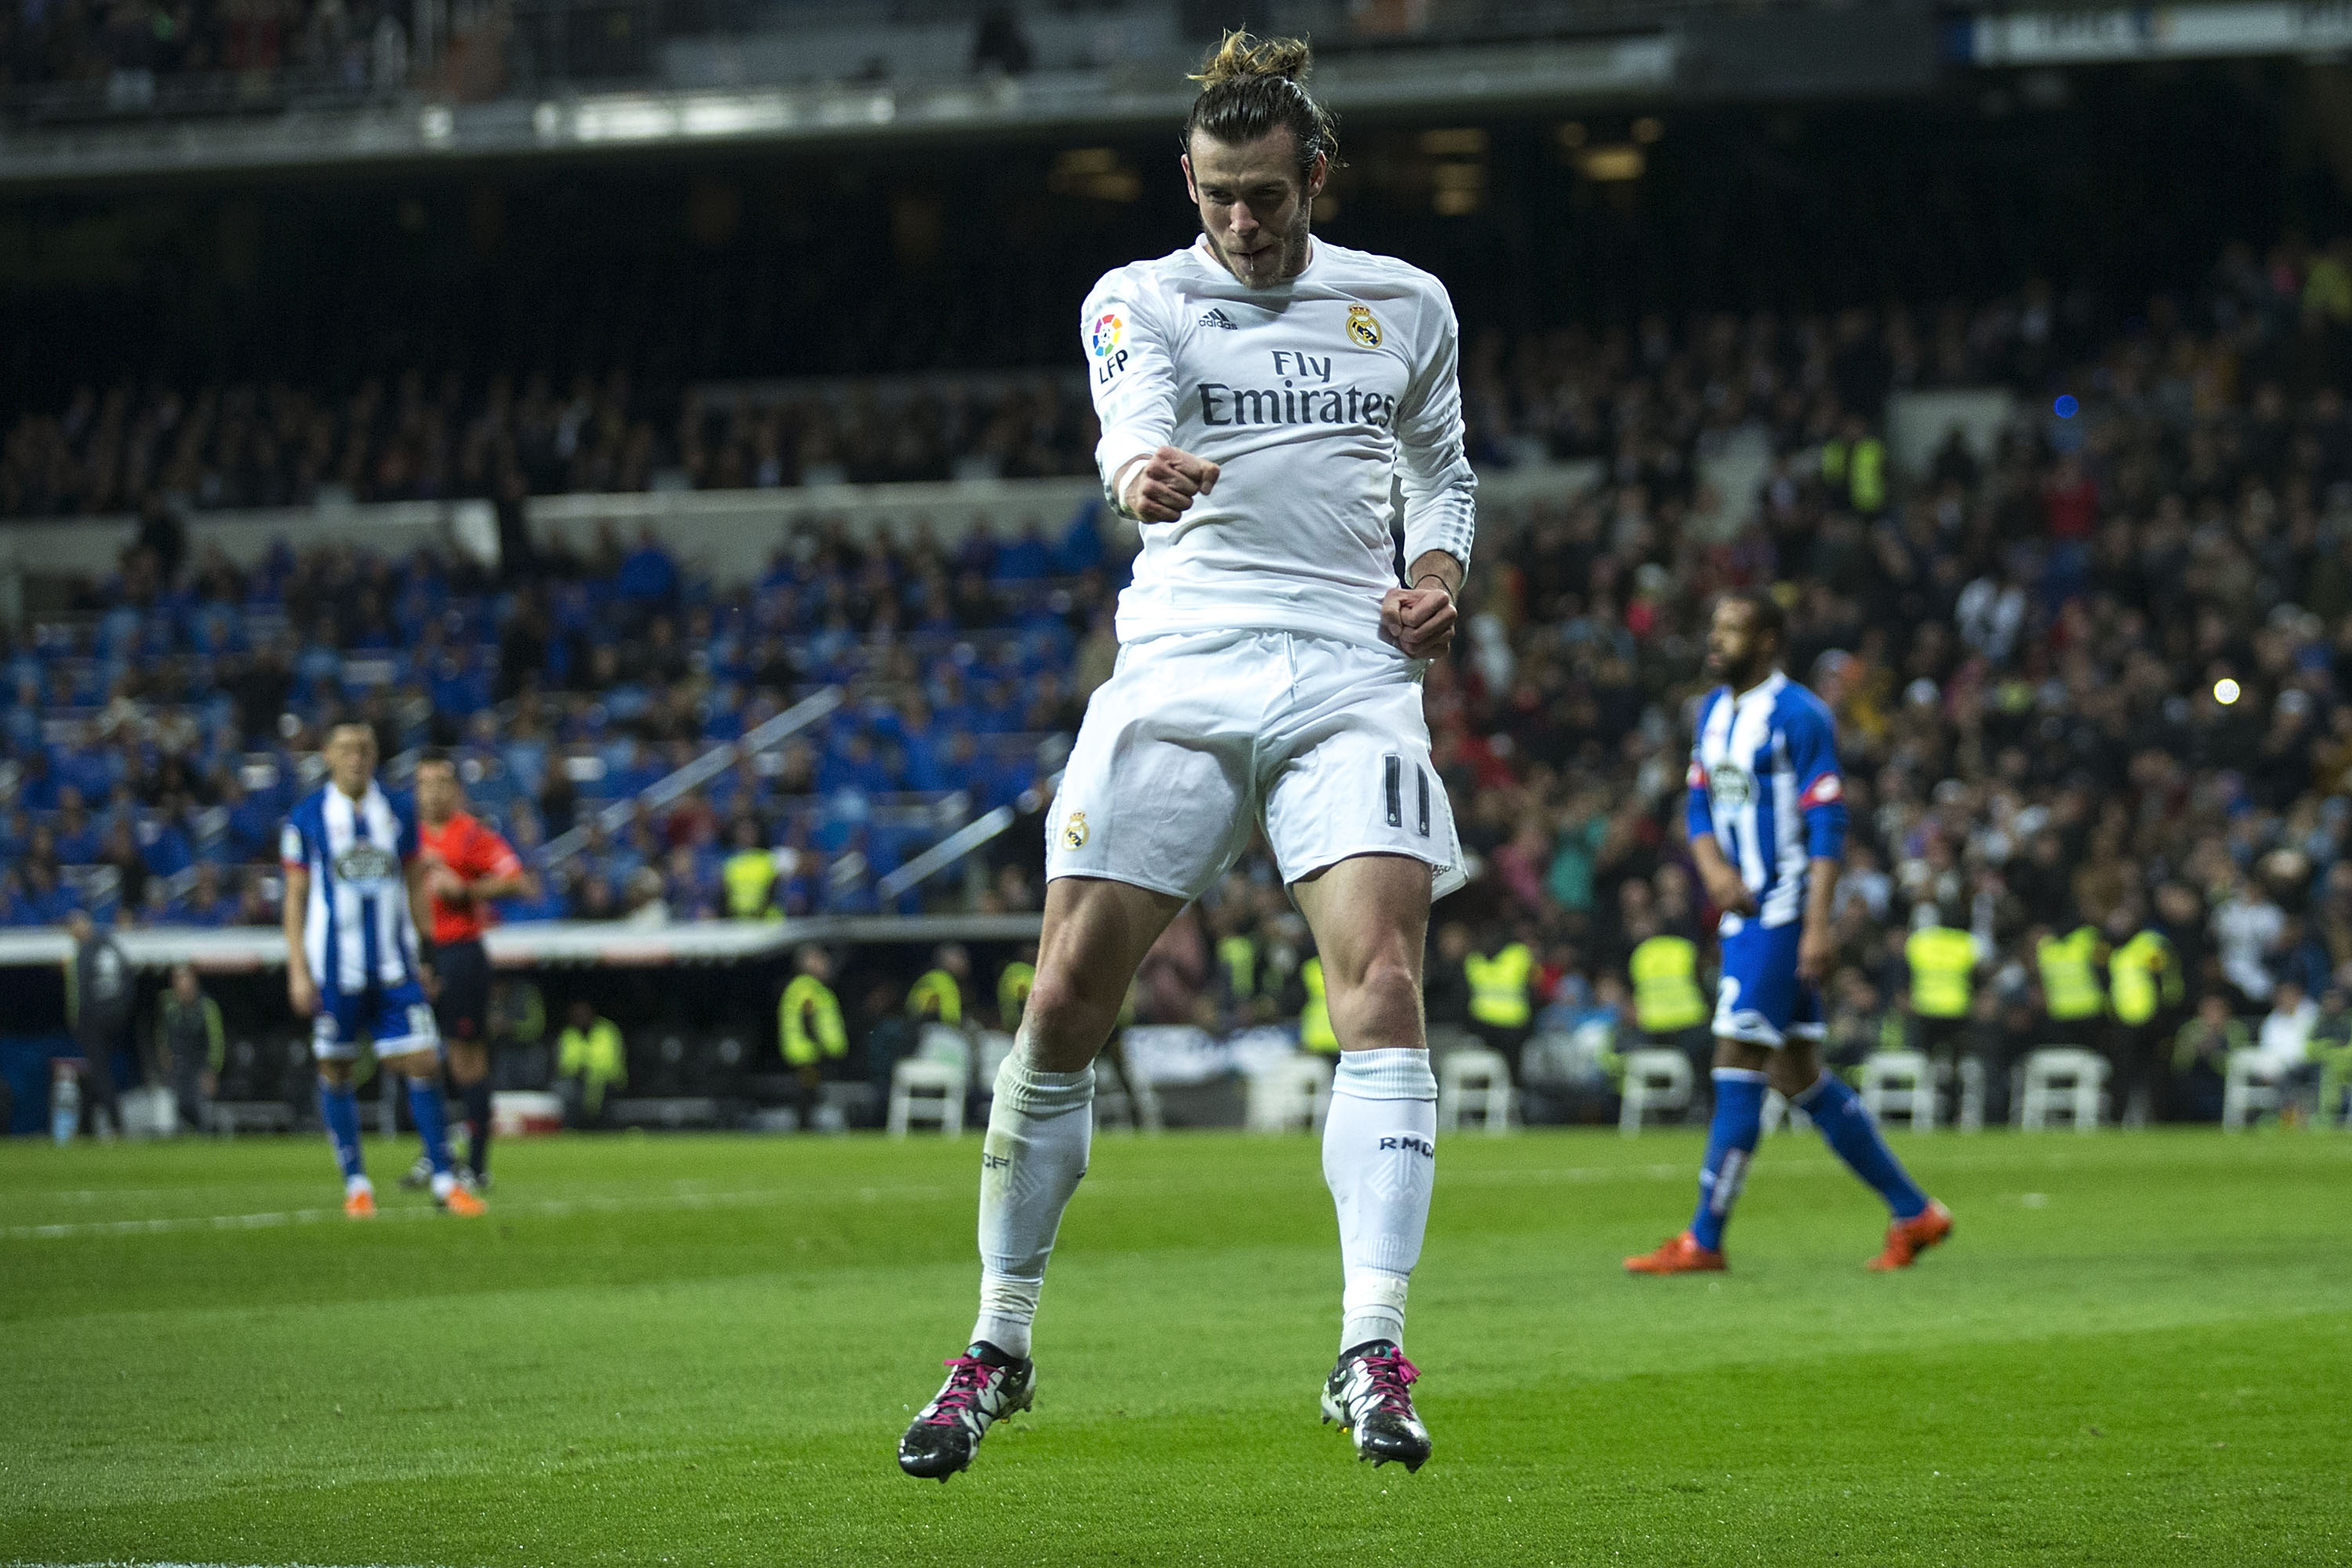 Welsh wizard Gareth Bale shows off his garish new boots ahead of Real  Madrid's Champions League game on Wednesday